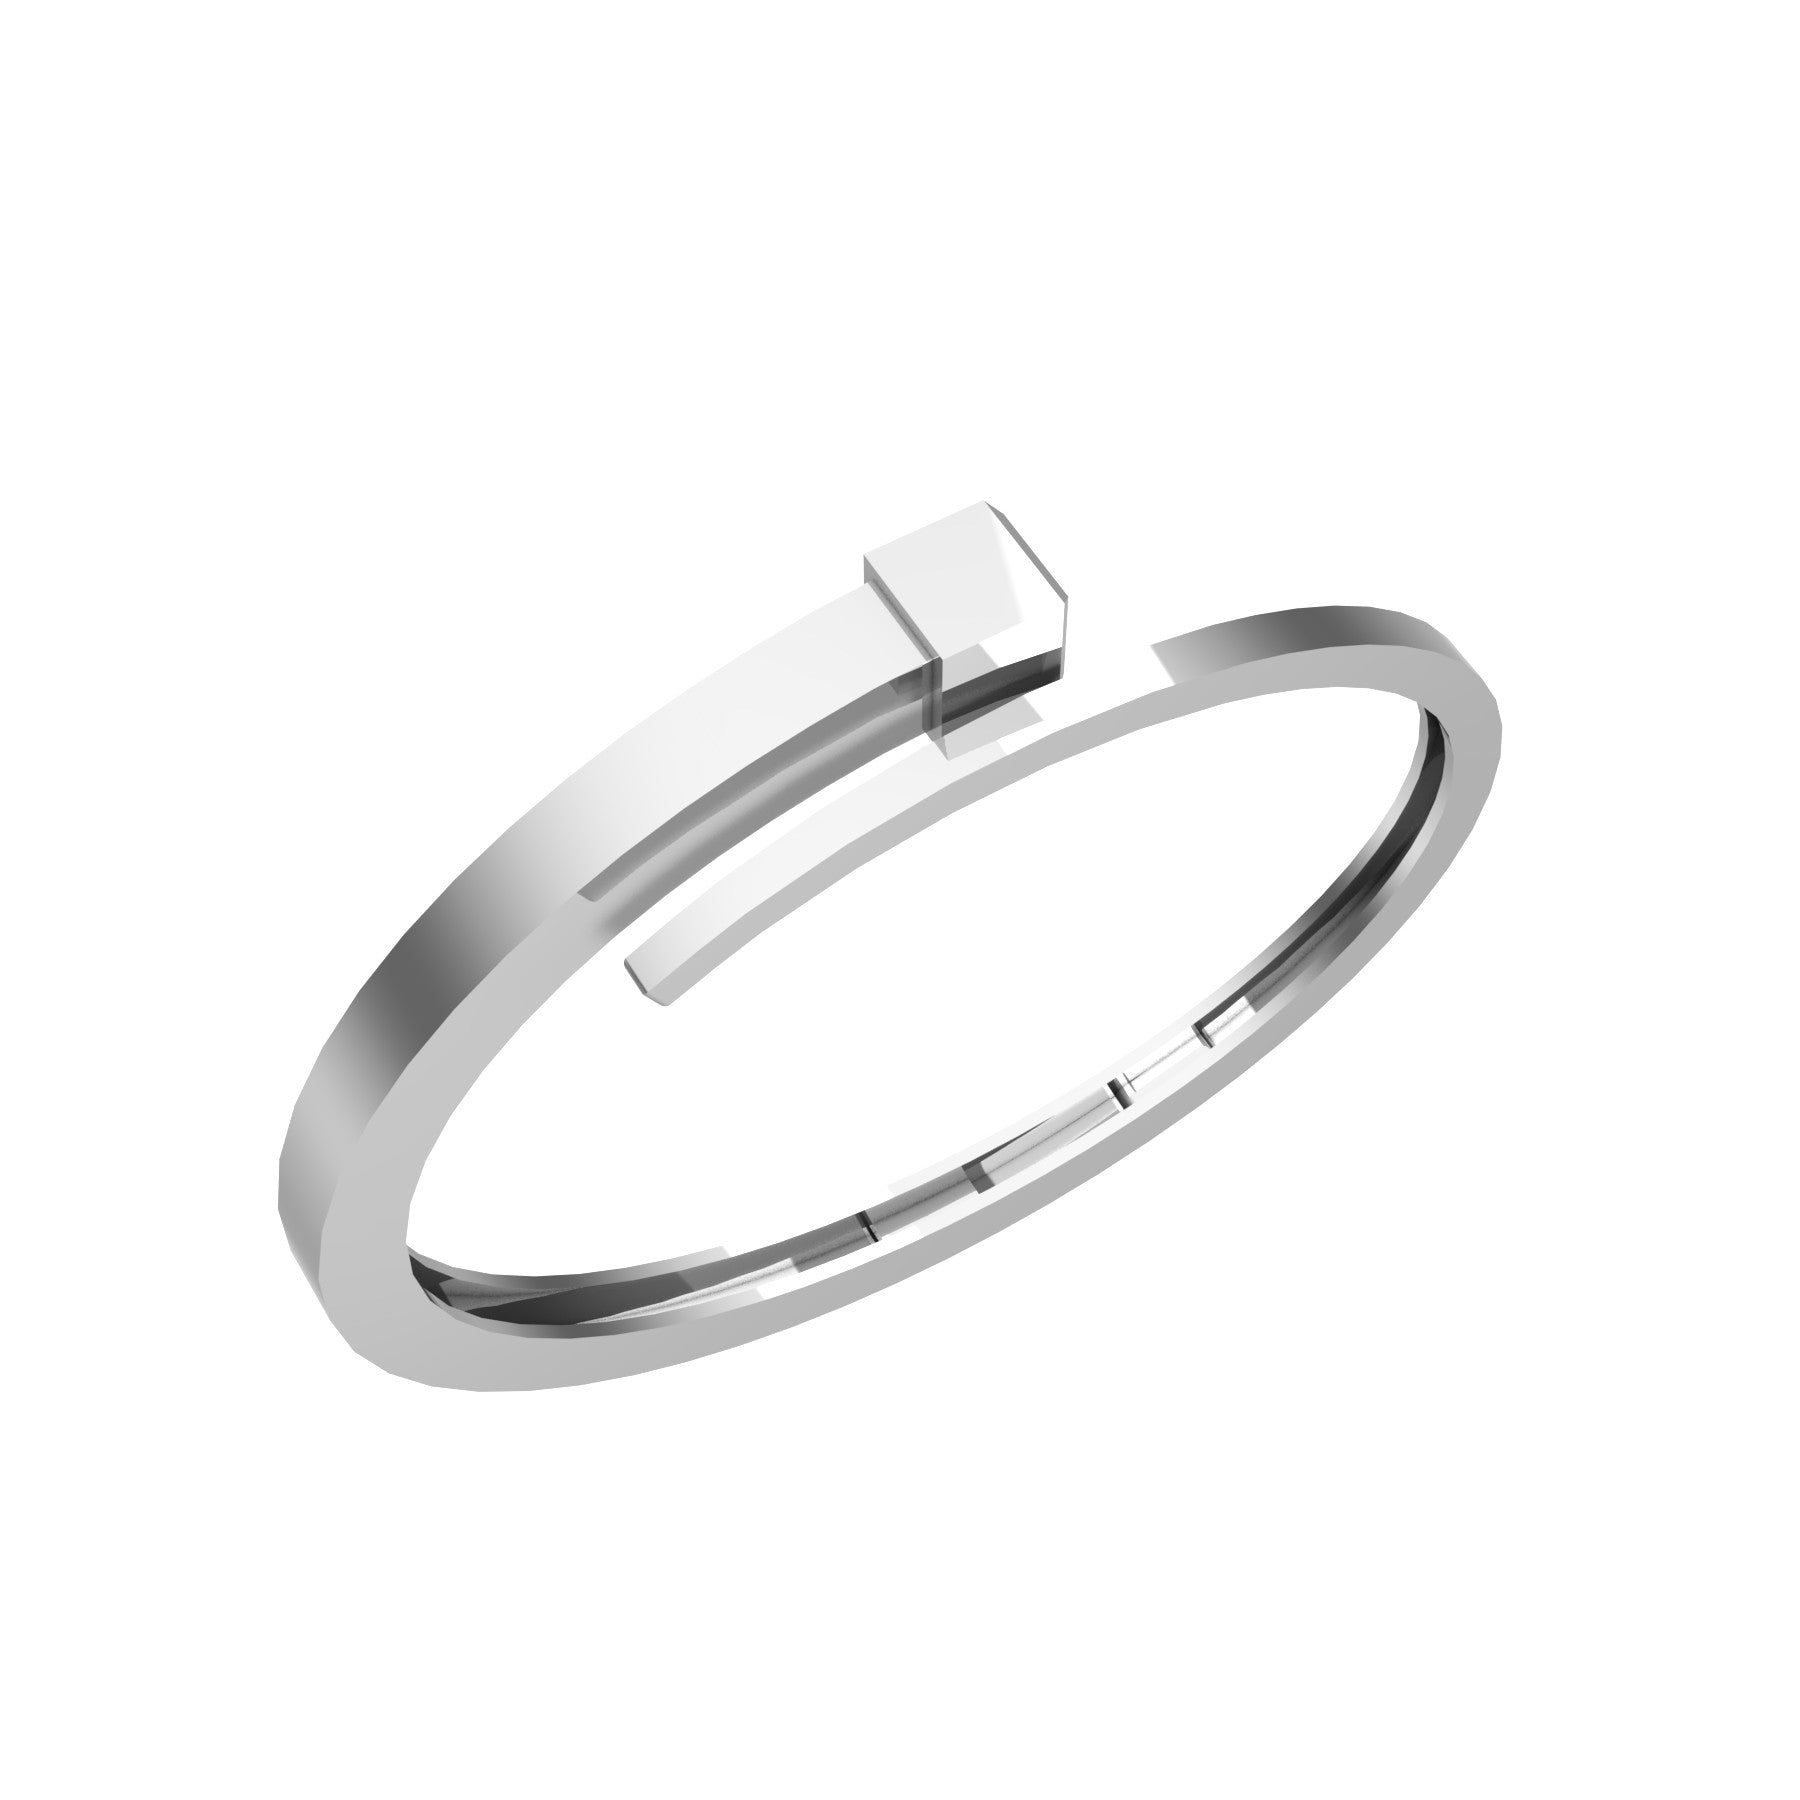 lucky nail bracelet, sterling silver, weight about 24,5 g (0.86 oz), width 8 mm max